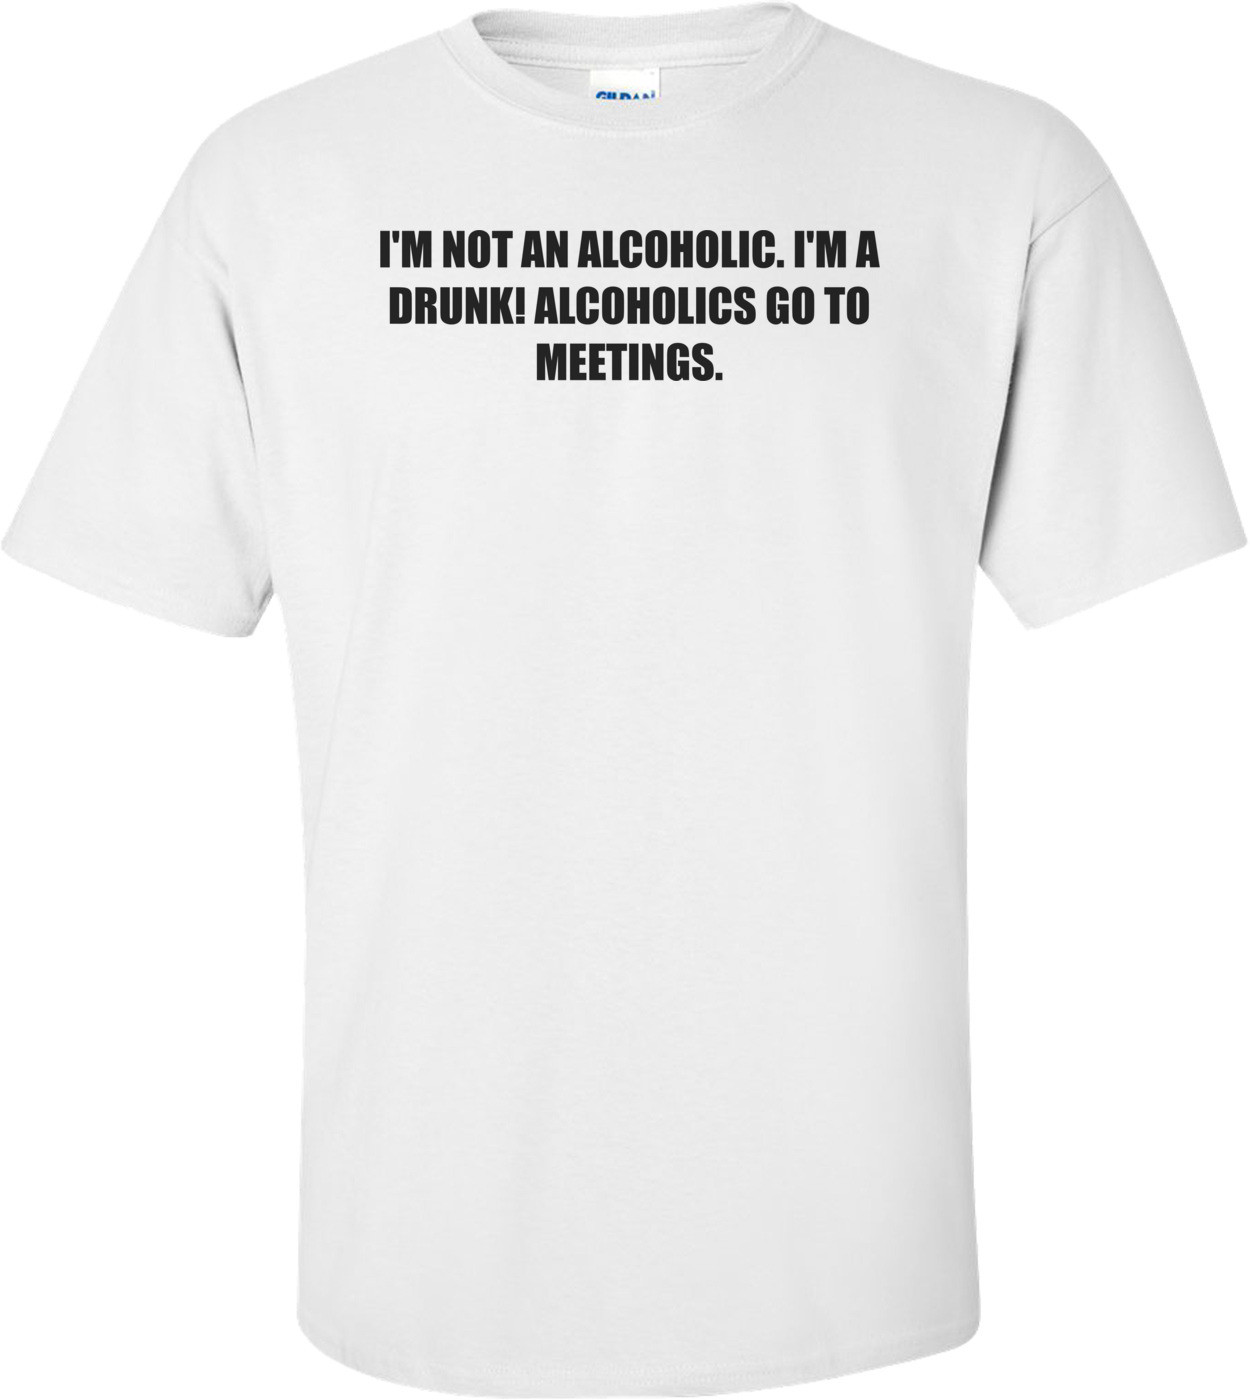 I'M NOT AN ALCOHOLIC. I'M A DRUNK! ALCOHOLICS GO TO MEETINGS. Shirt